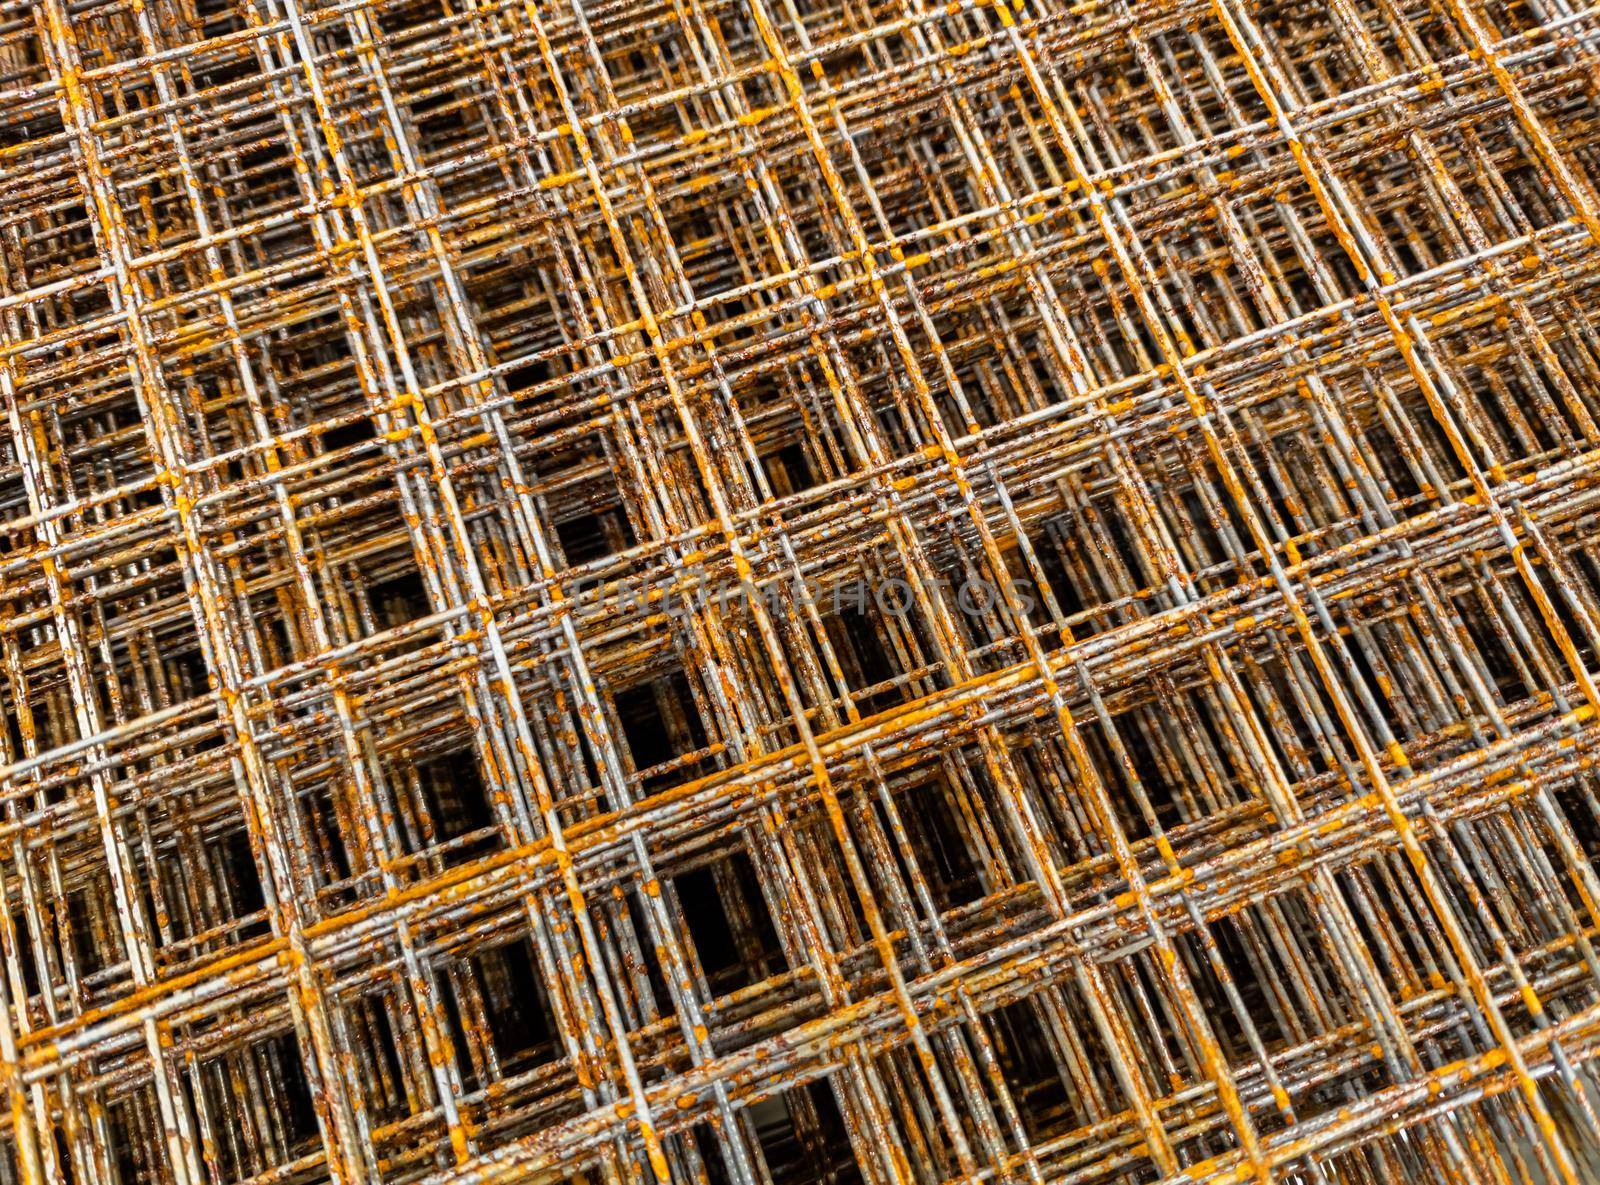 Thin rusty steel welded wire mesh for concrete reinforcing. Industrial material corrosion full frame background.